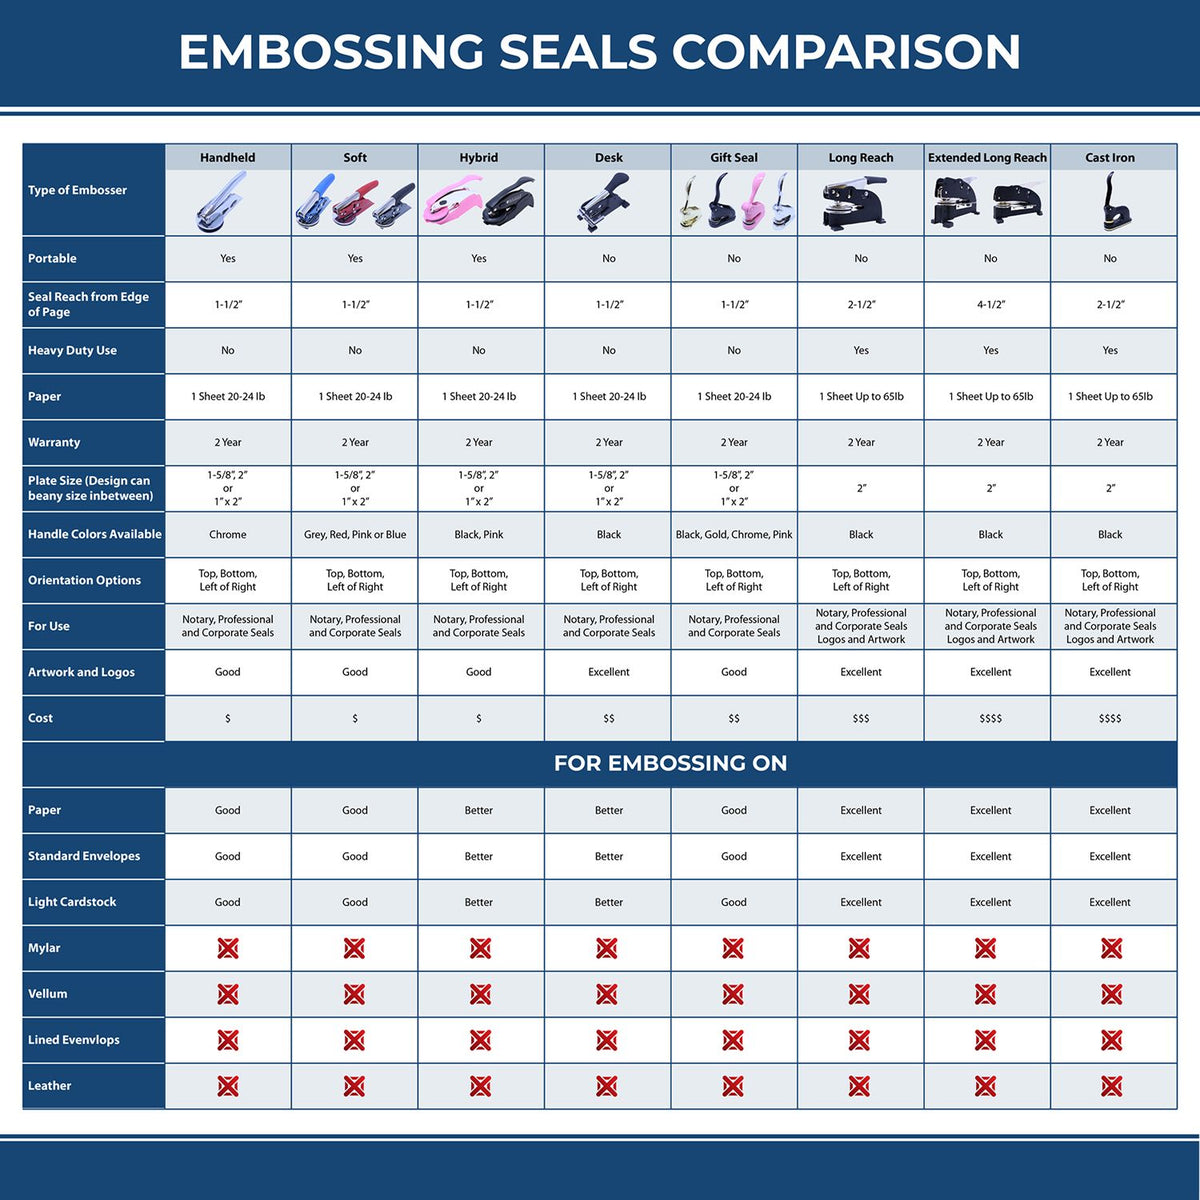 A comparison chart for the different types of mount models available for the Handheld Georgia Architect Seal Embosser.